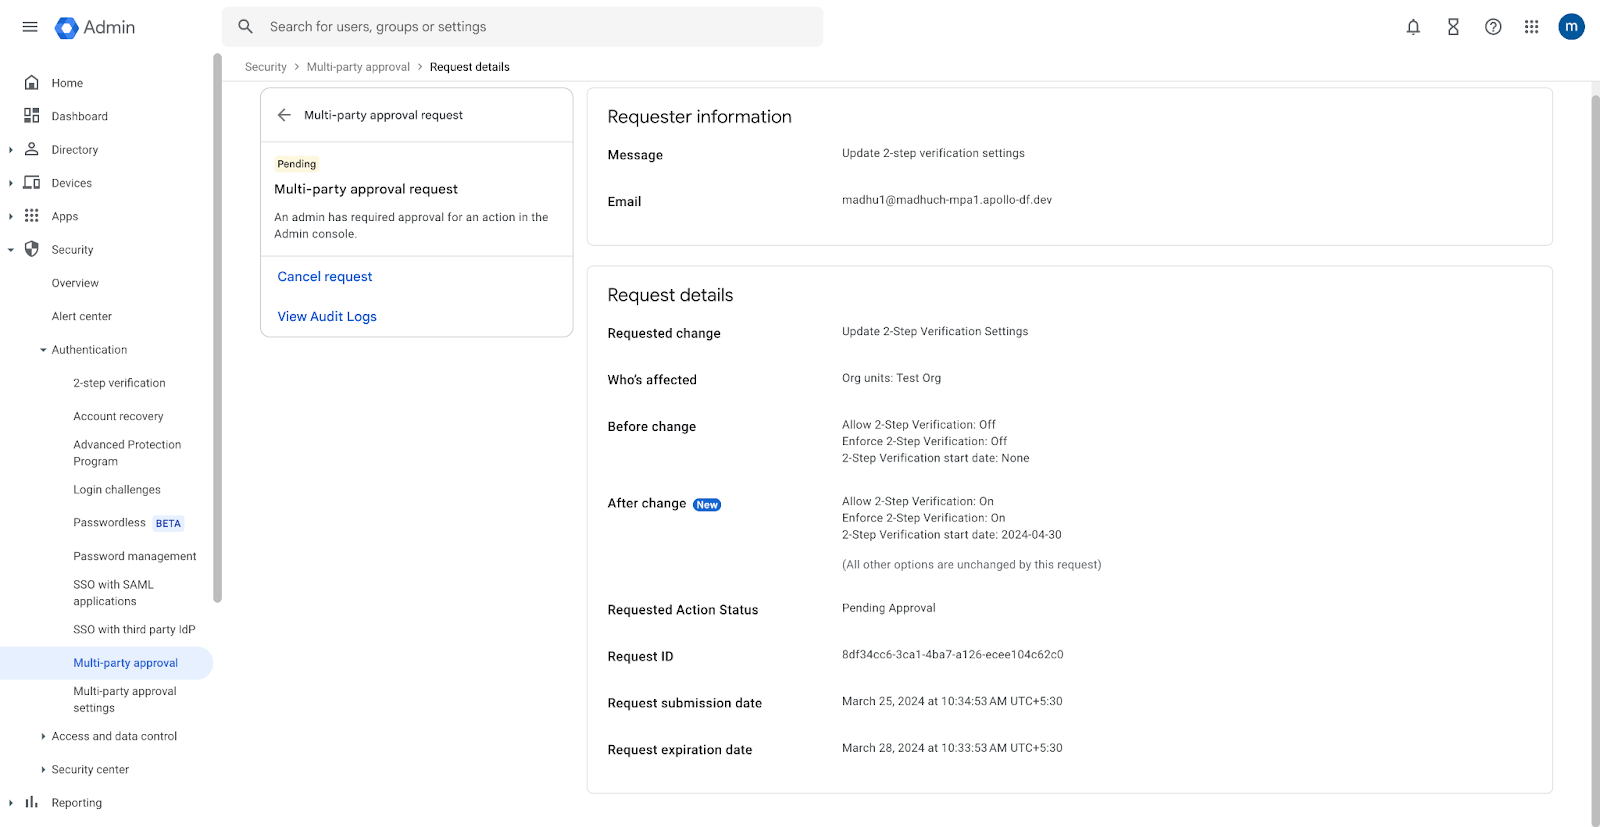 Google Workspace dashboard image showing a multi-party approval request being made